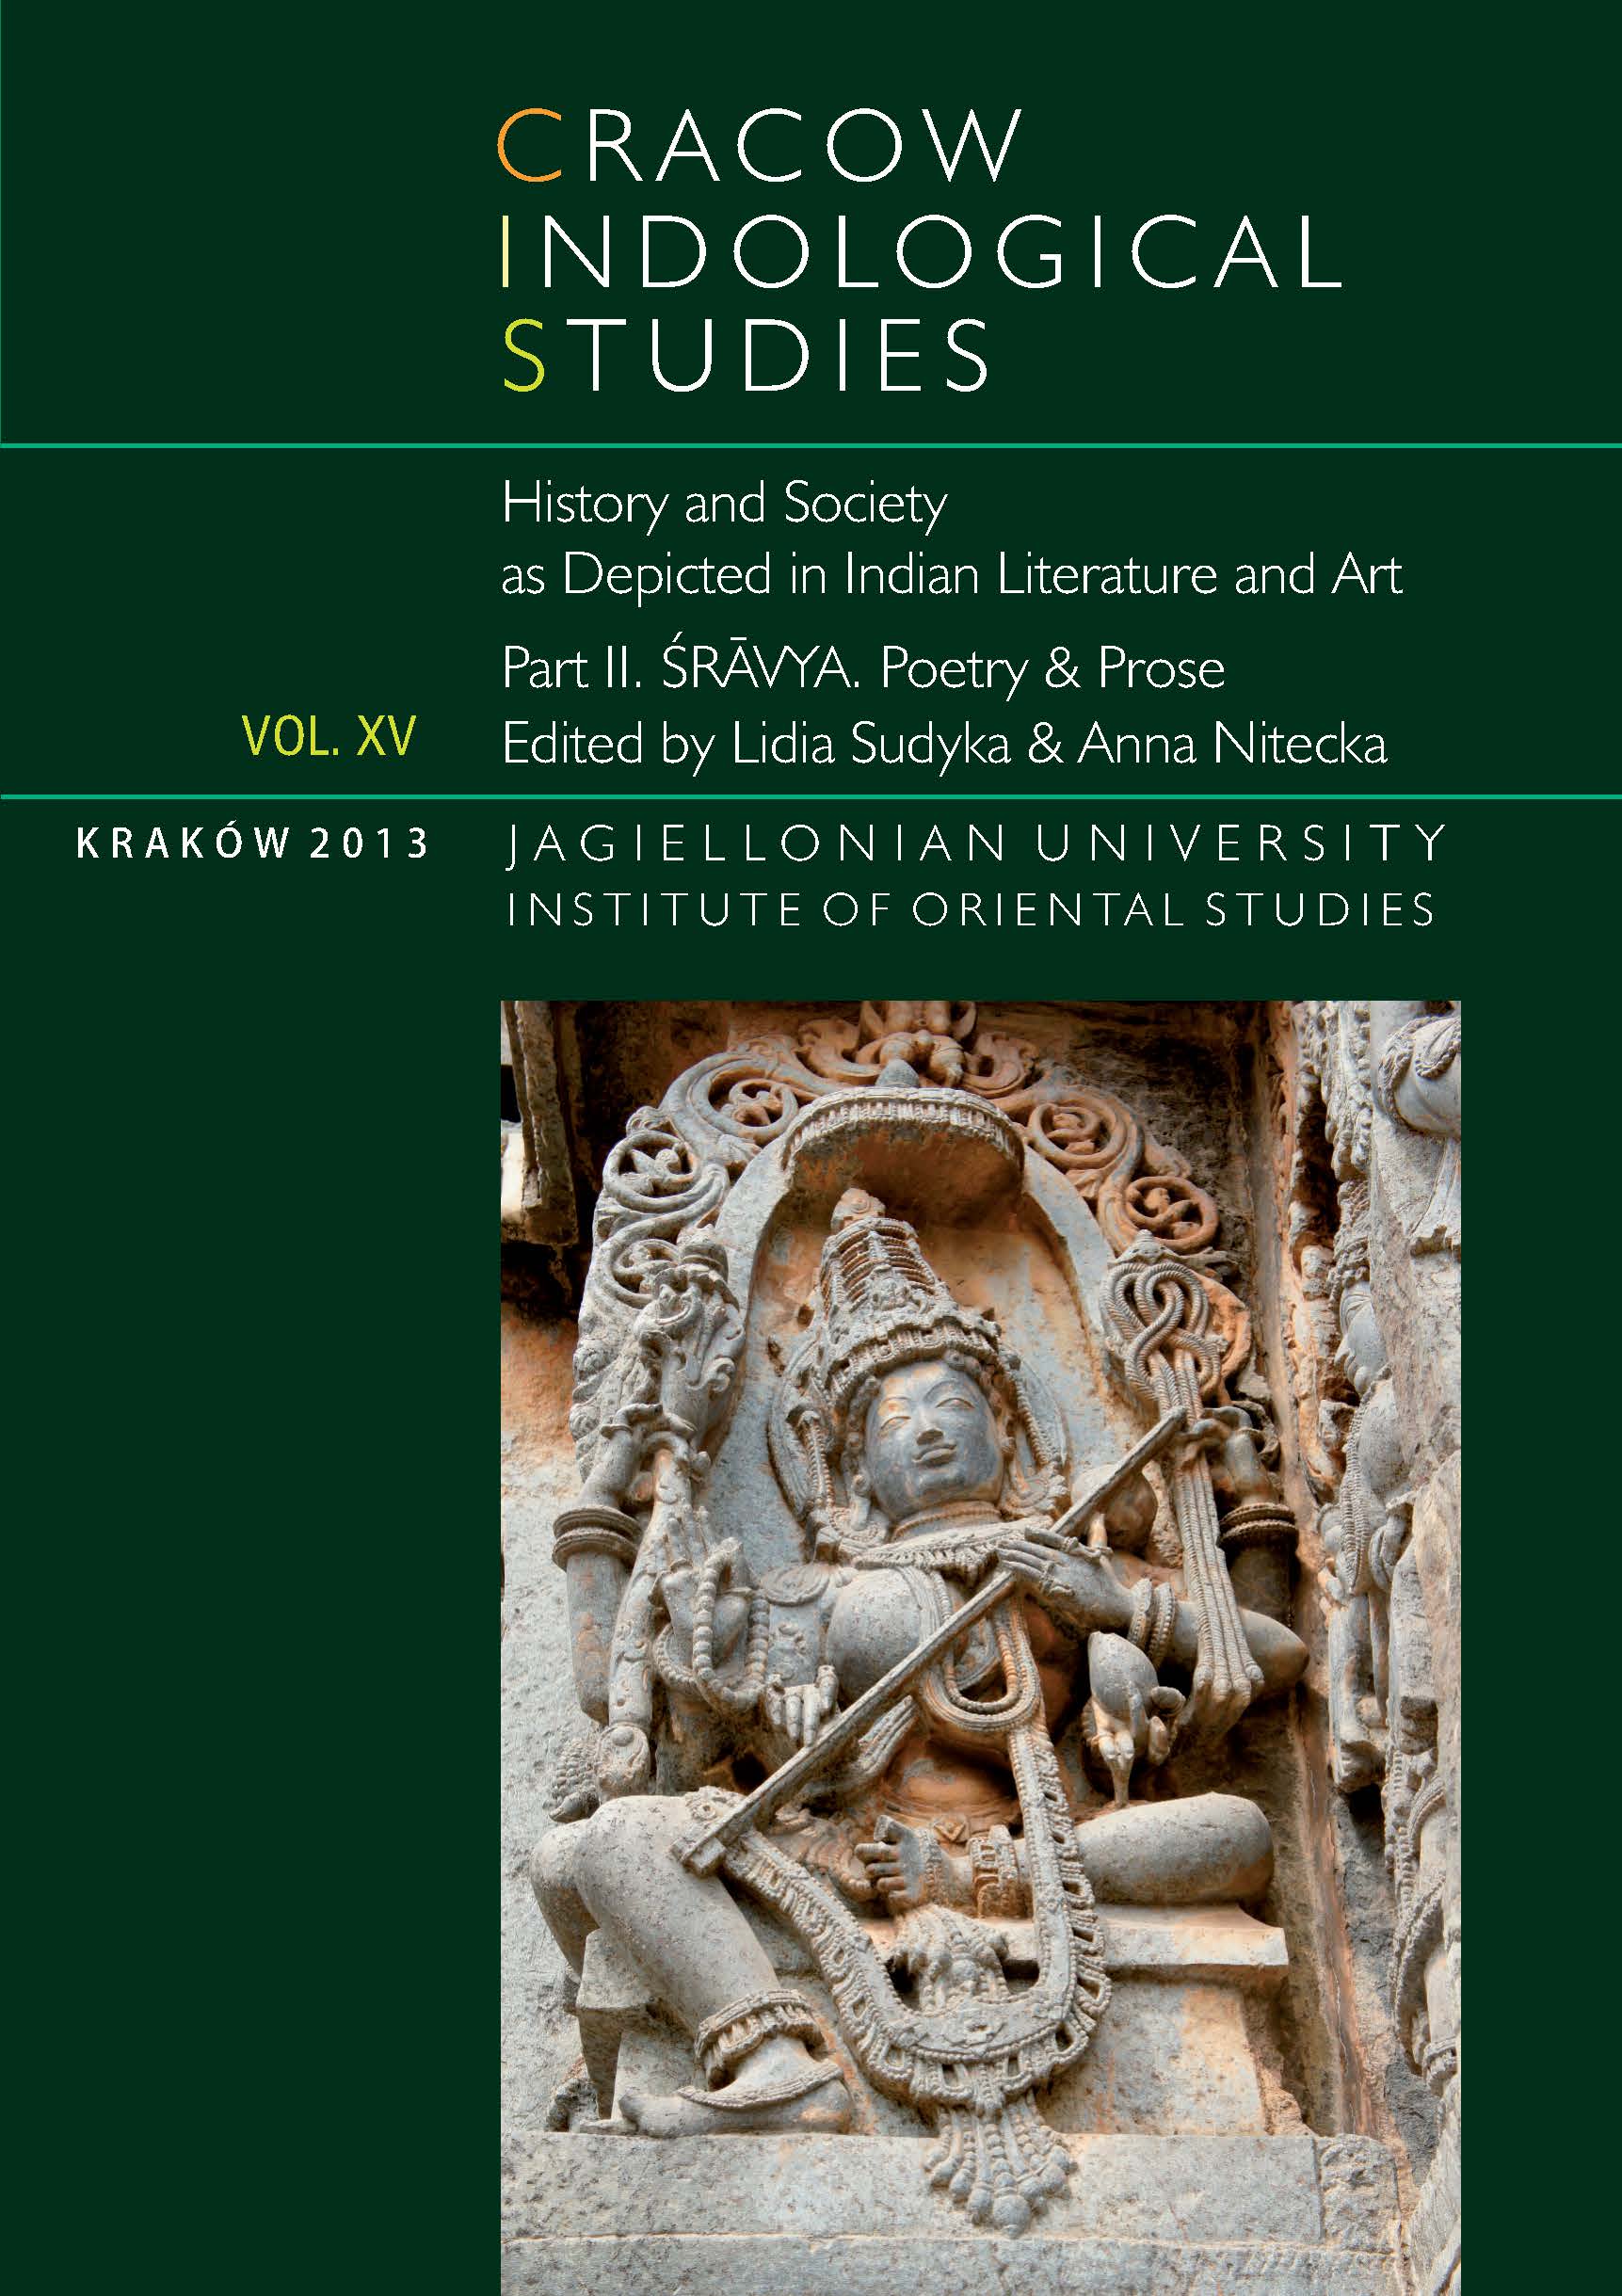 					View Vol. 15 (2013): History and Society as Depicted in Indian Literature and Art
				